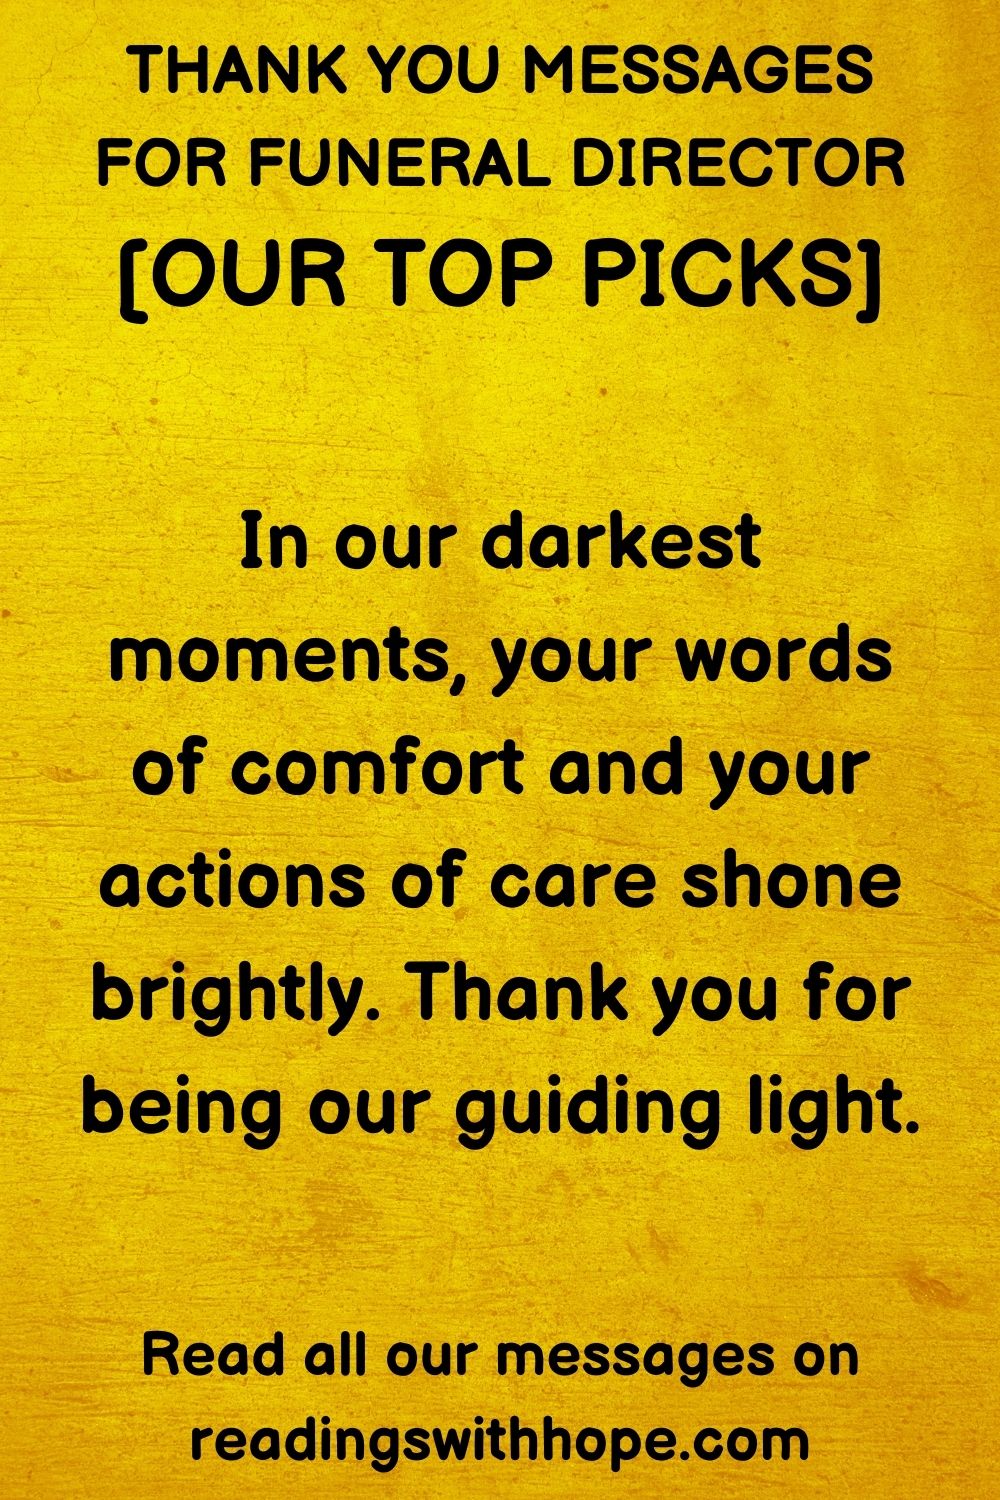 thank you message for funeral director that says "In our darkest moments, your words of comfort and your actions of care shone brightly. Thank you for being our guiding light."